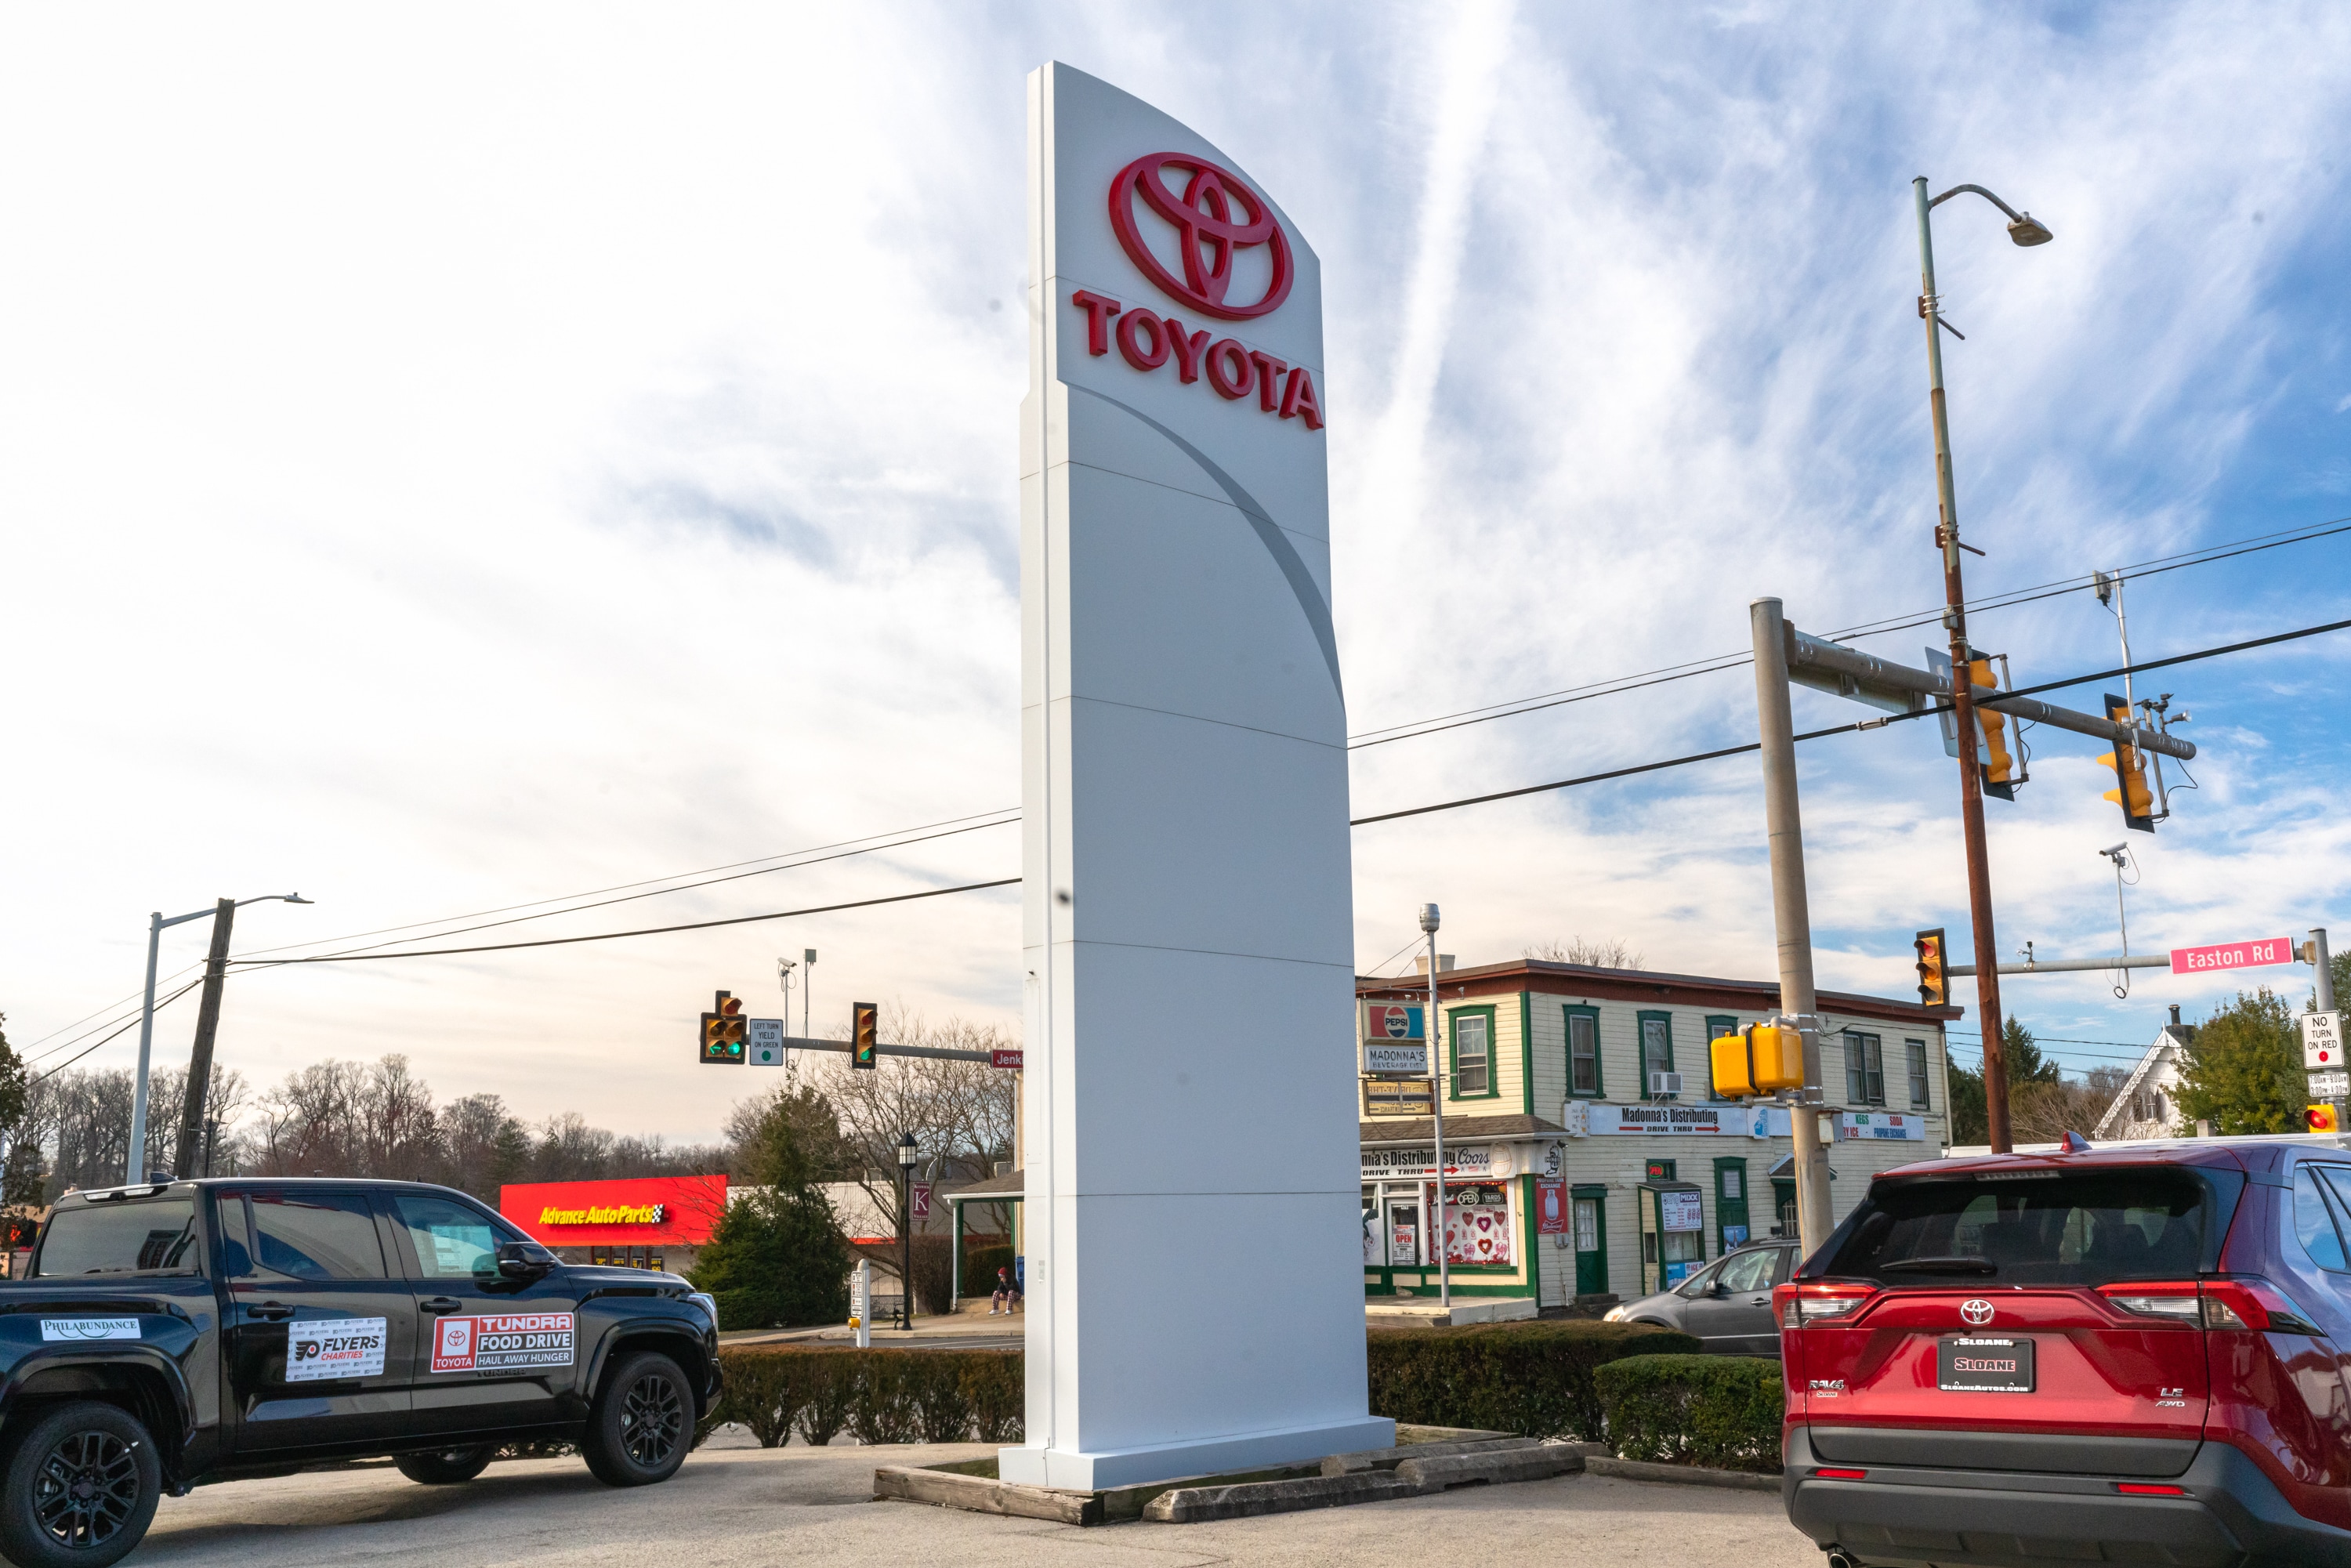 Toyota sign in front of Sloane Toyota's dealership in the heart of Glenside, PA.